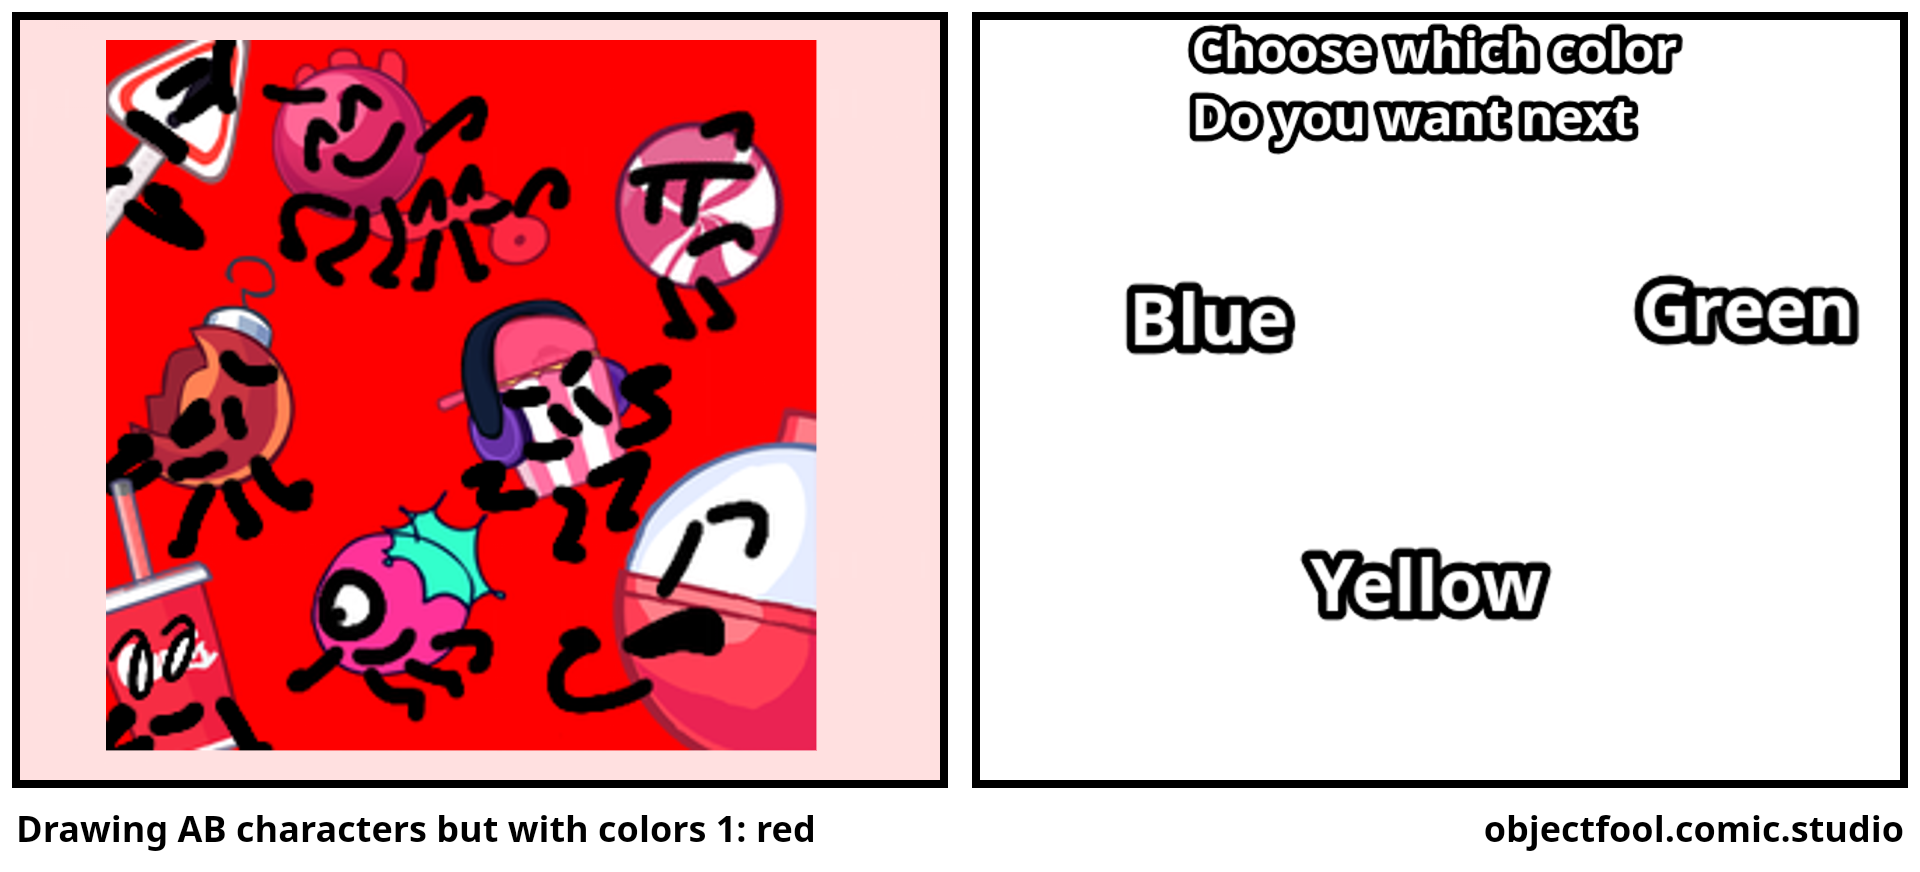 Drawing AB characters but with colors 1: red